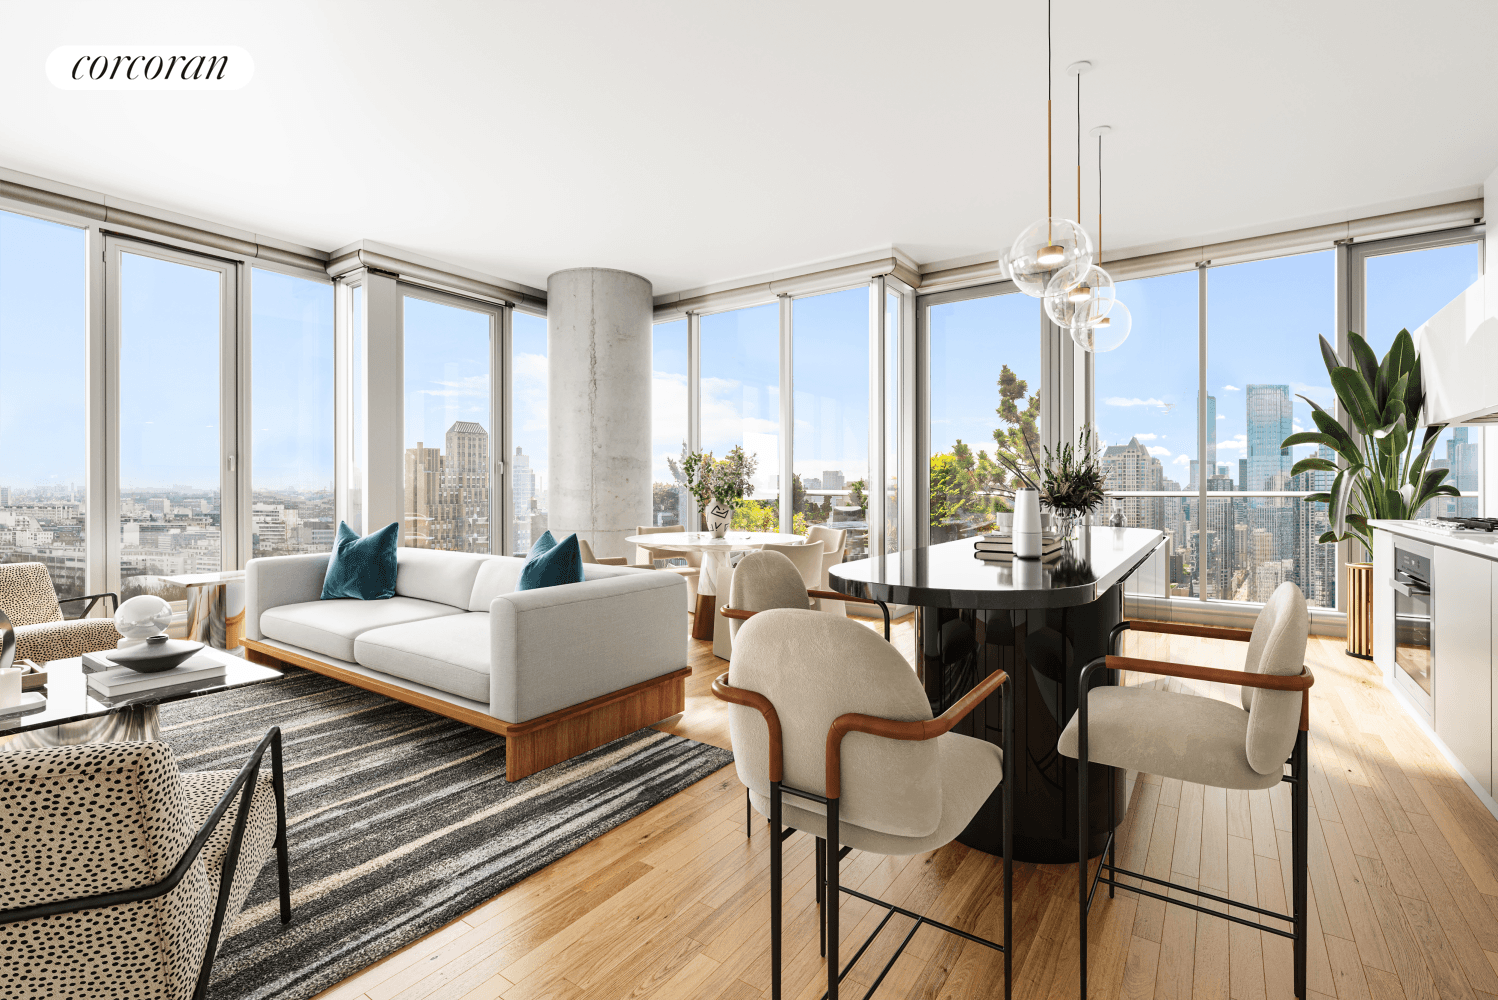 Virtually Staged Apartment 23AEast at 56 Leonard Street Three Bedrooms Three Bathrooms Over 2, 200 SqFt of interior space Facing North and East, this residence is newly refinished and offers ...